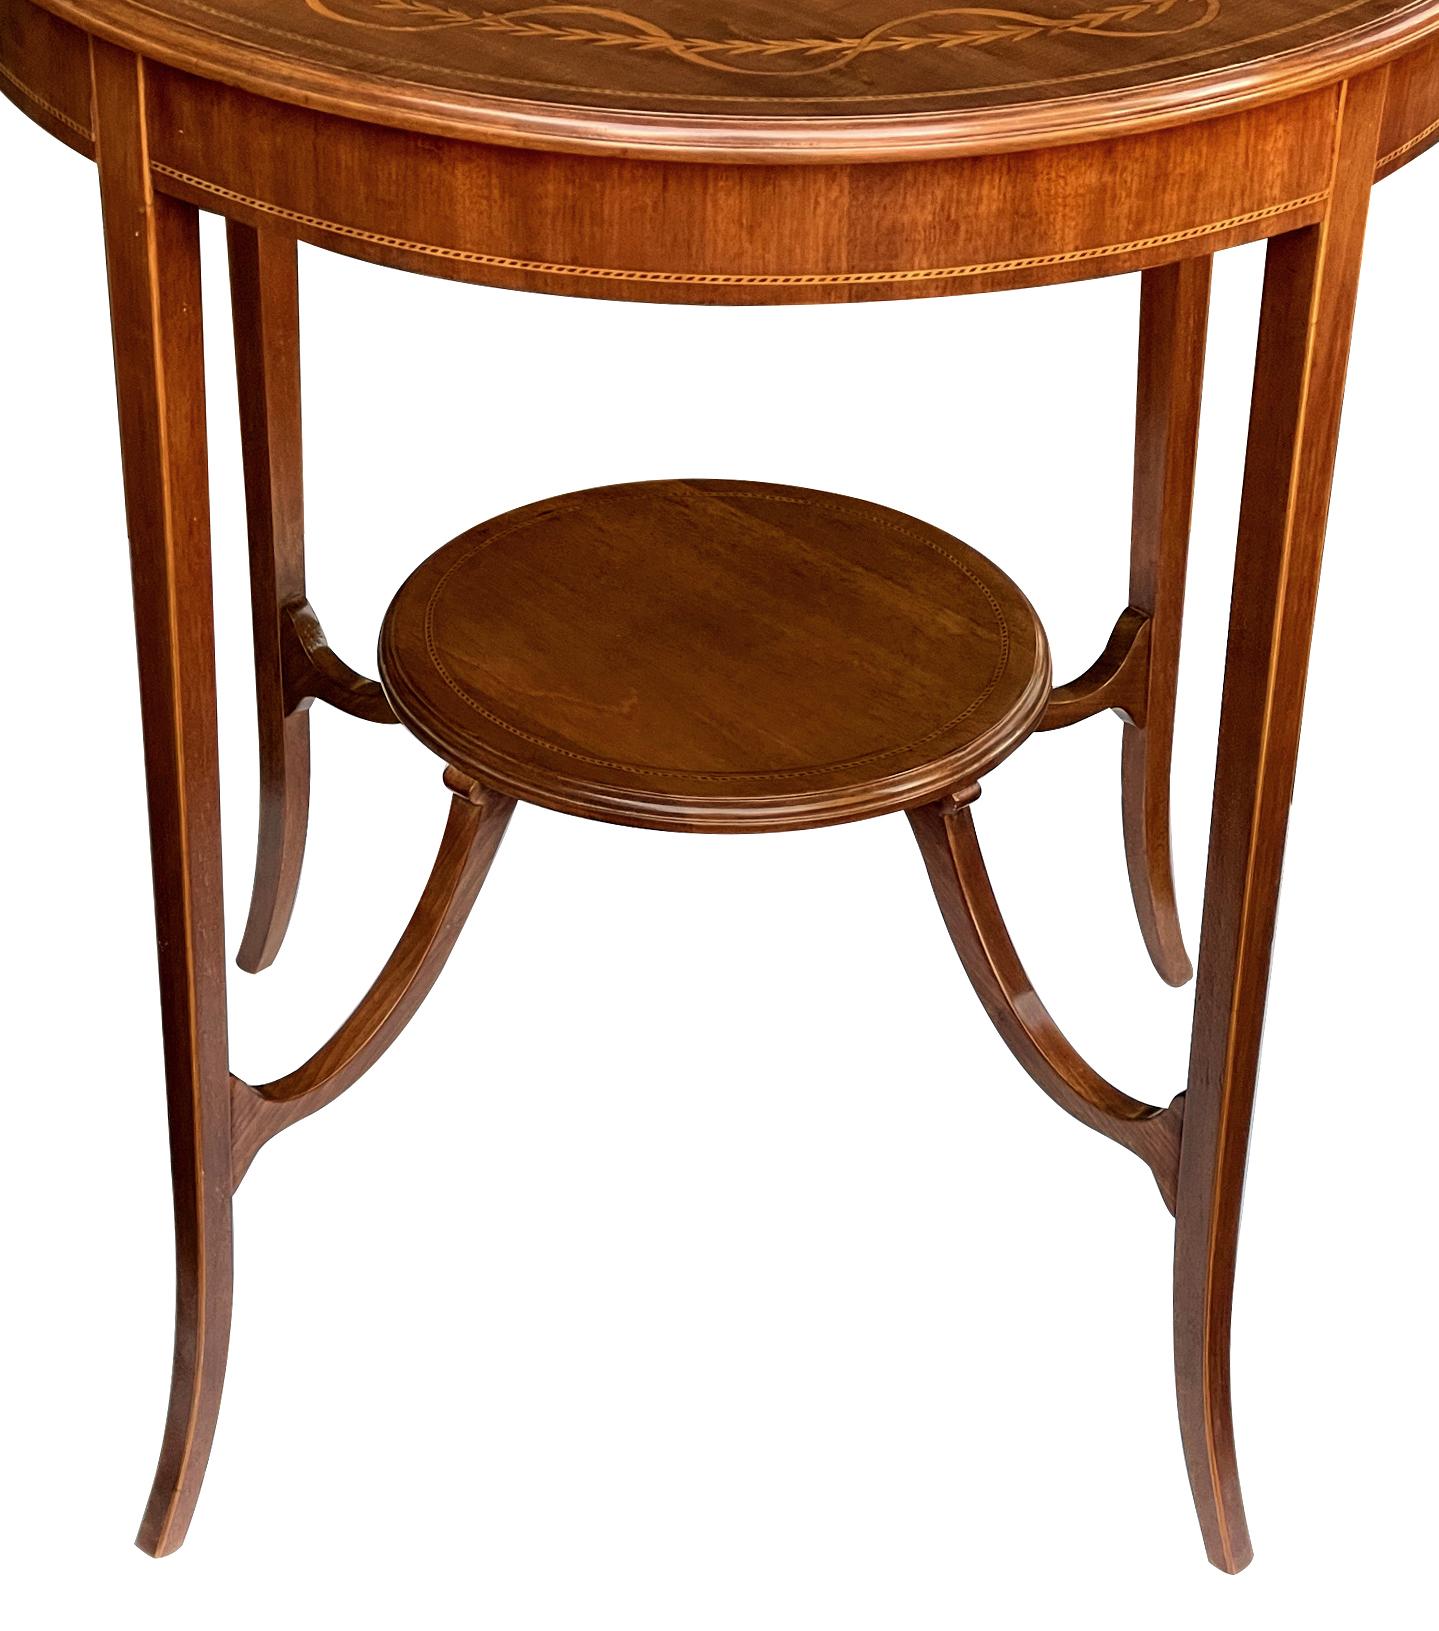 English Edwardian Mahogany Inlaid Circular Side/Occasional Table For Sale 1